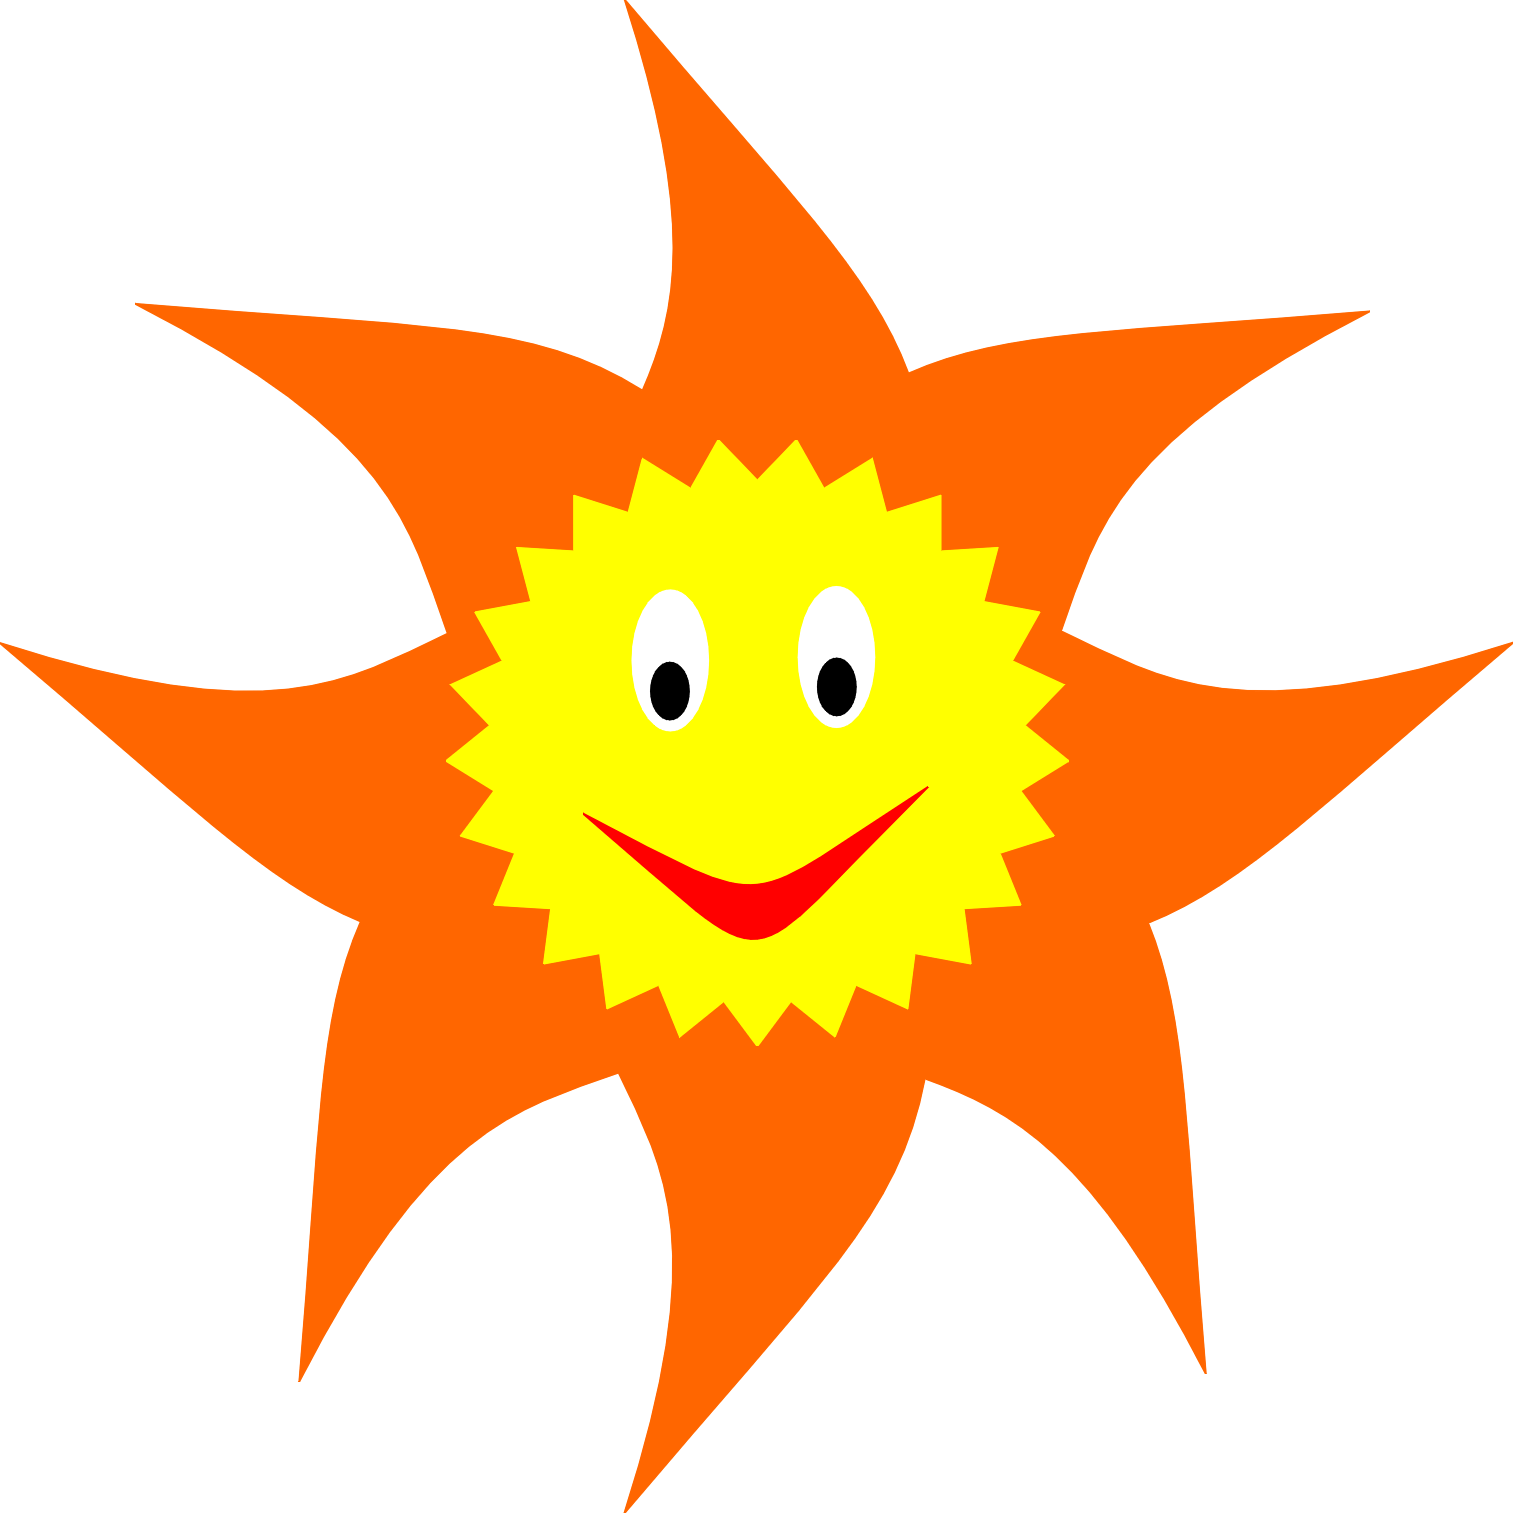 Clipart Of Sun - Clipart library